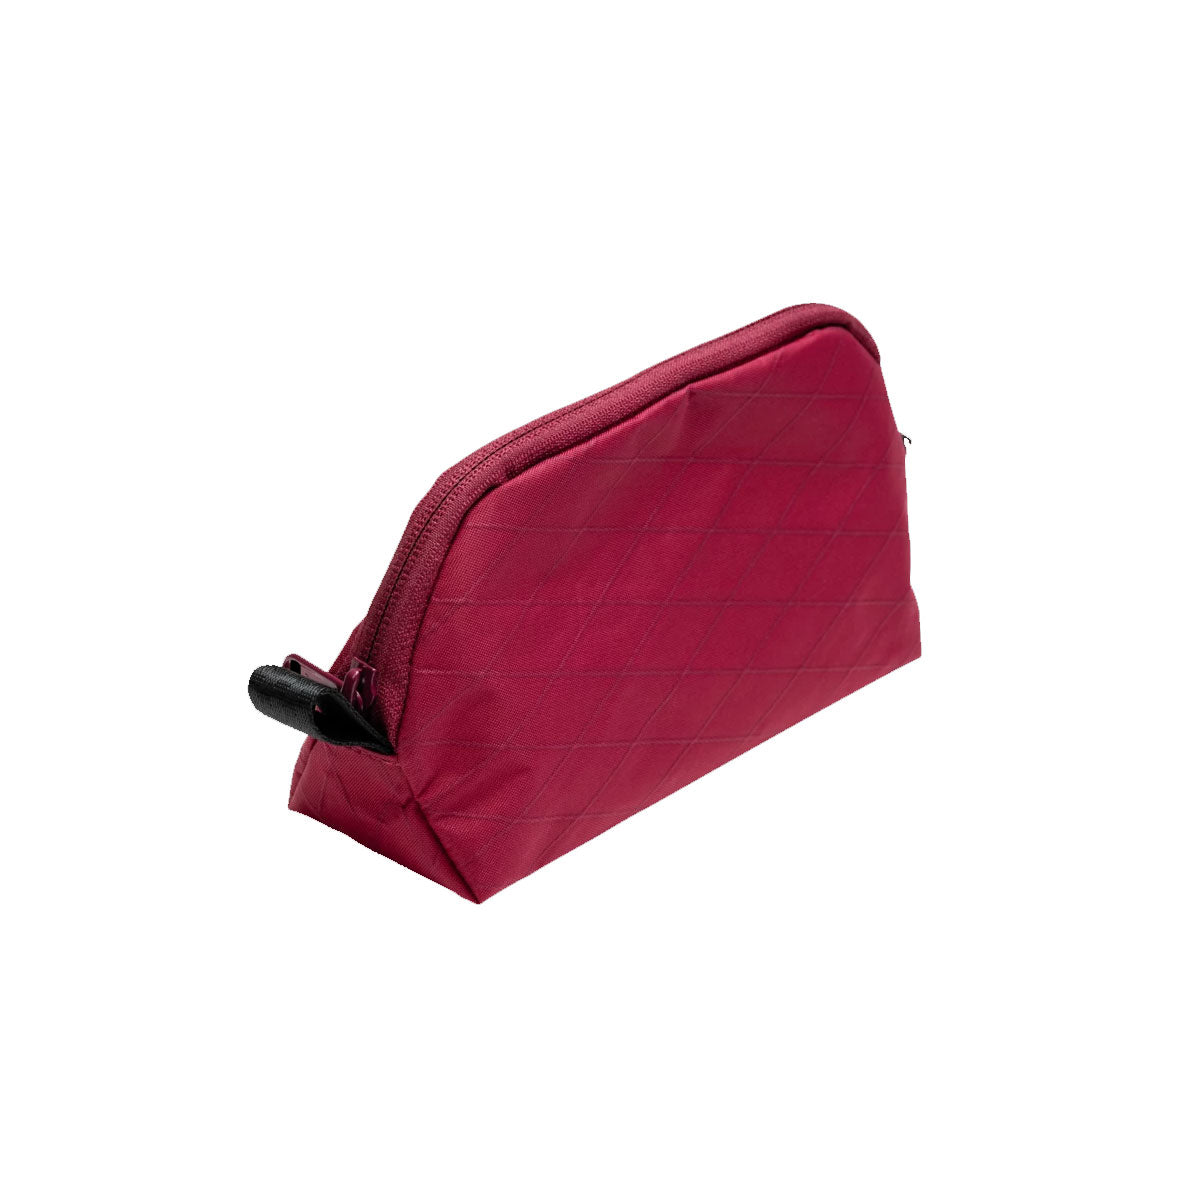 Able Carry : The Daily Stash Pouch : X-Pac Port Red